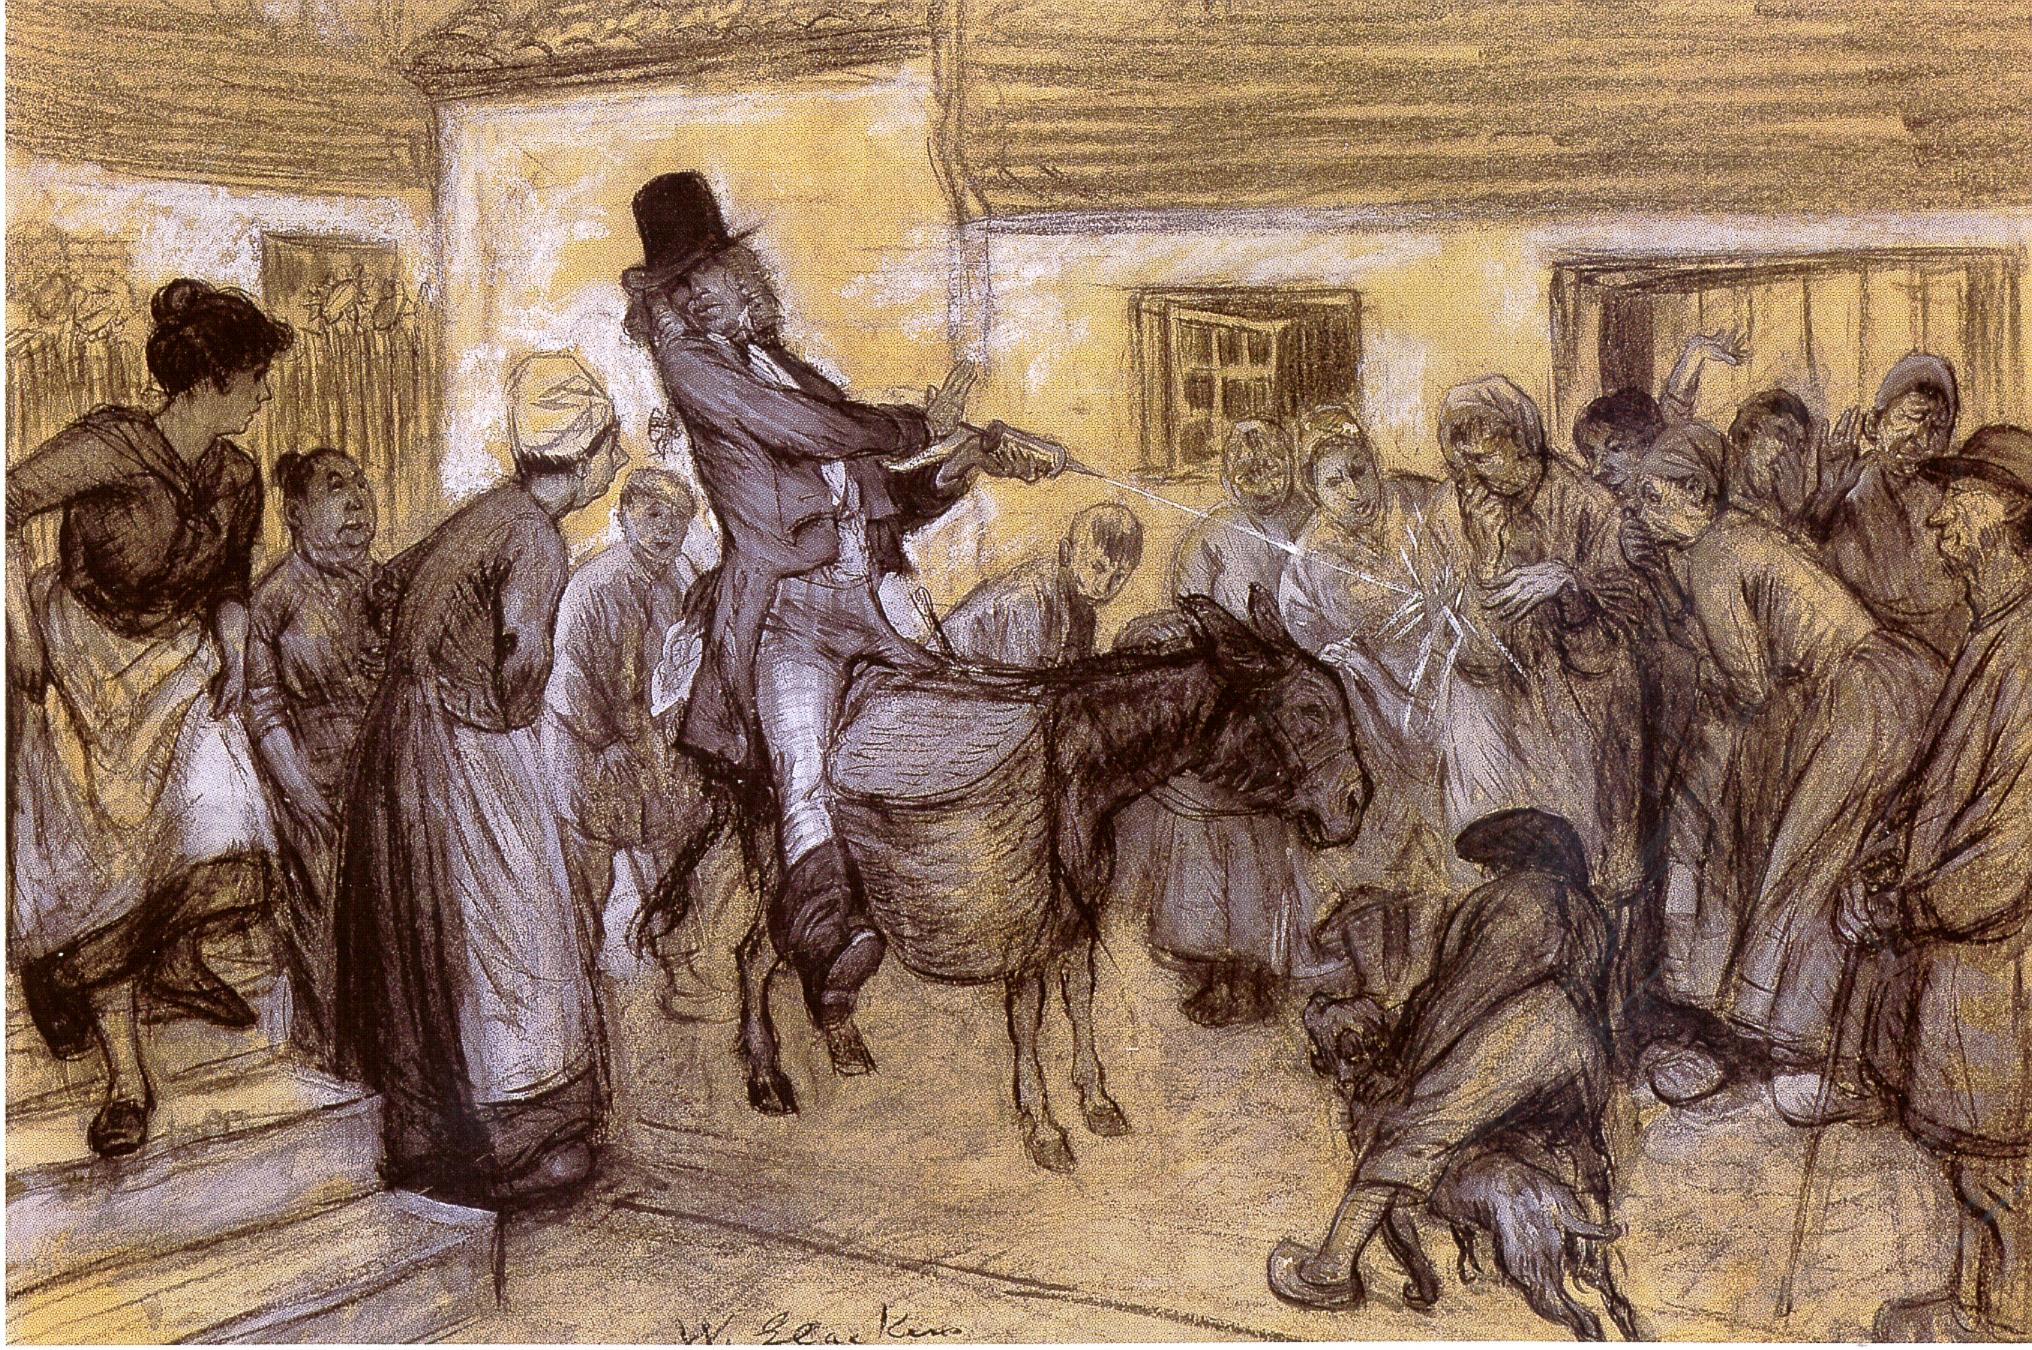 William Glackens, 1870-1938
Dubourg Drew from his Basket his Mechanical Syringe, 1902
Charcoal, gouache and white chalk on paper
Signed (at bottom center): W. Glackens

Provenance:
Private collection, New York
Exhibited:
William Glackens: American